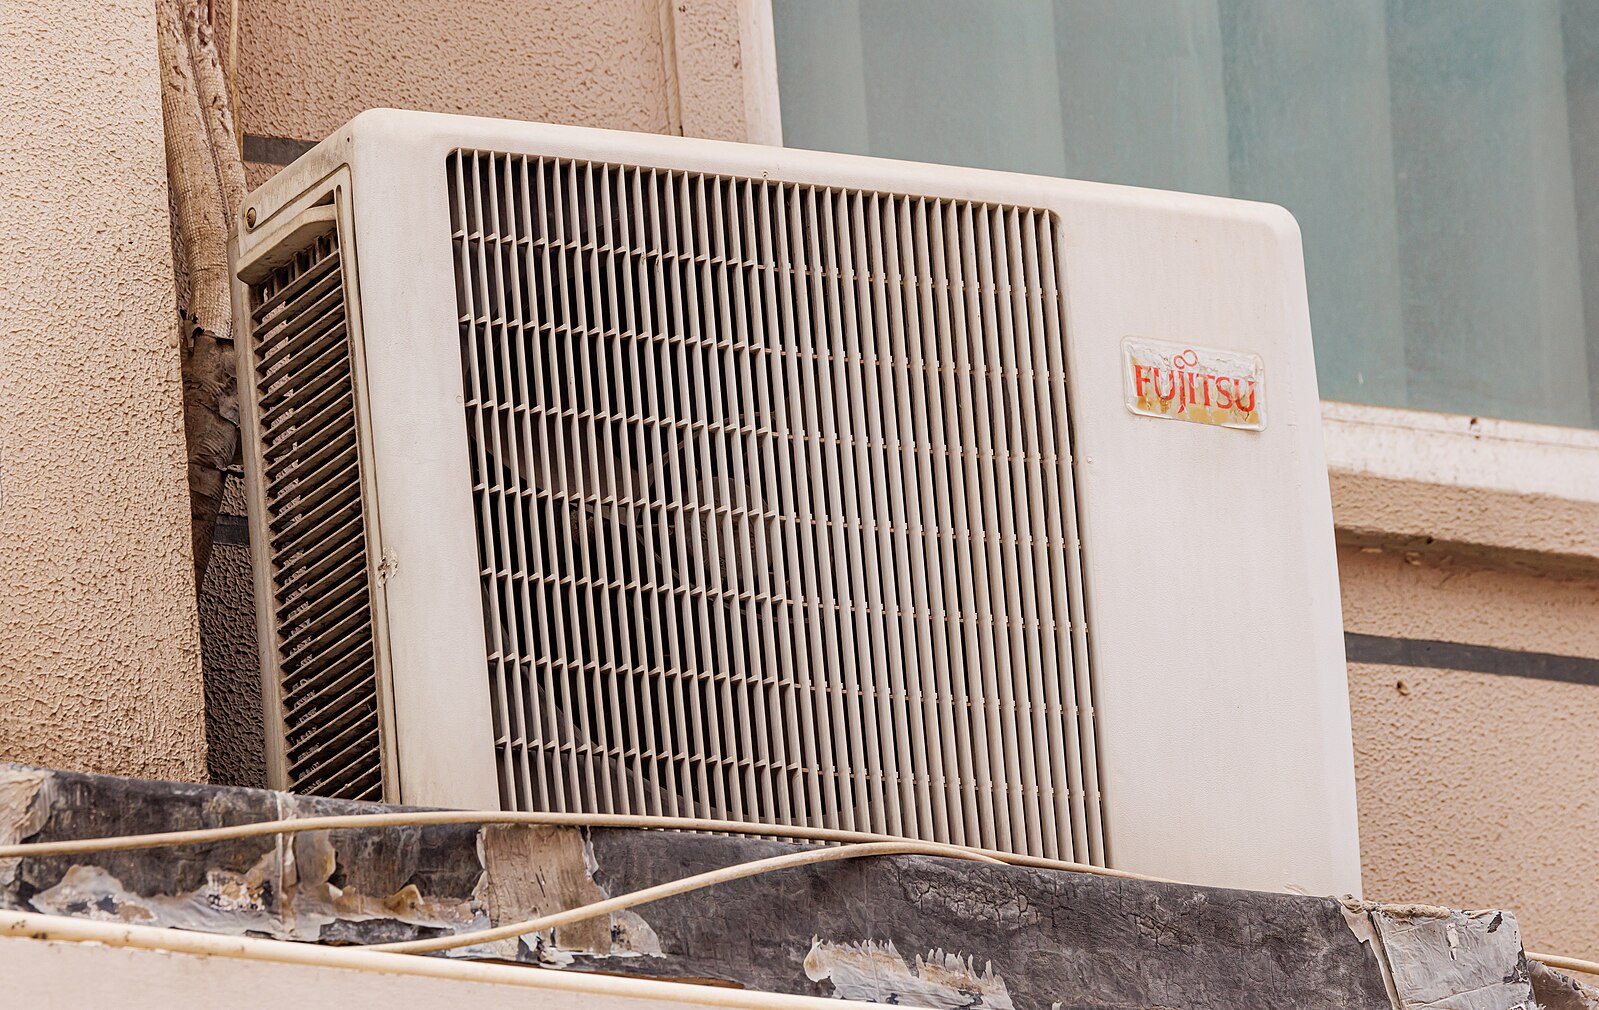 how to reset my Fujitsu air conditioner